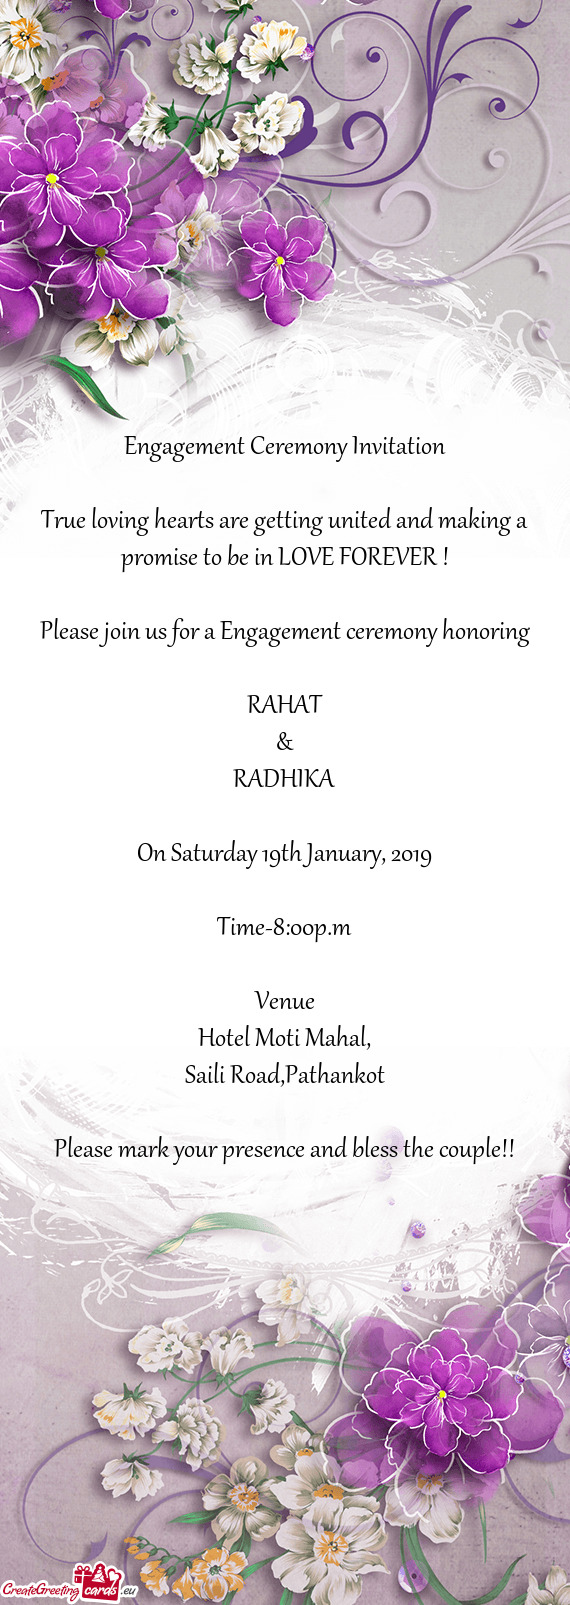 Please join us for a Engagement ceremony honoring